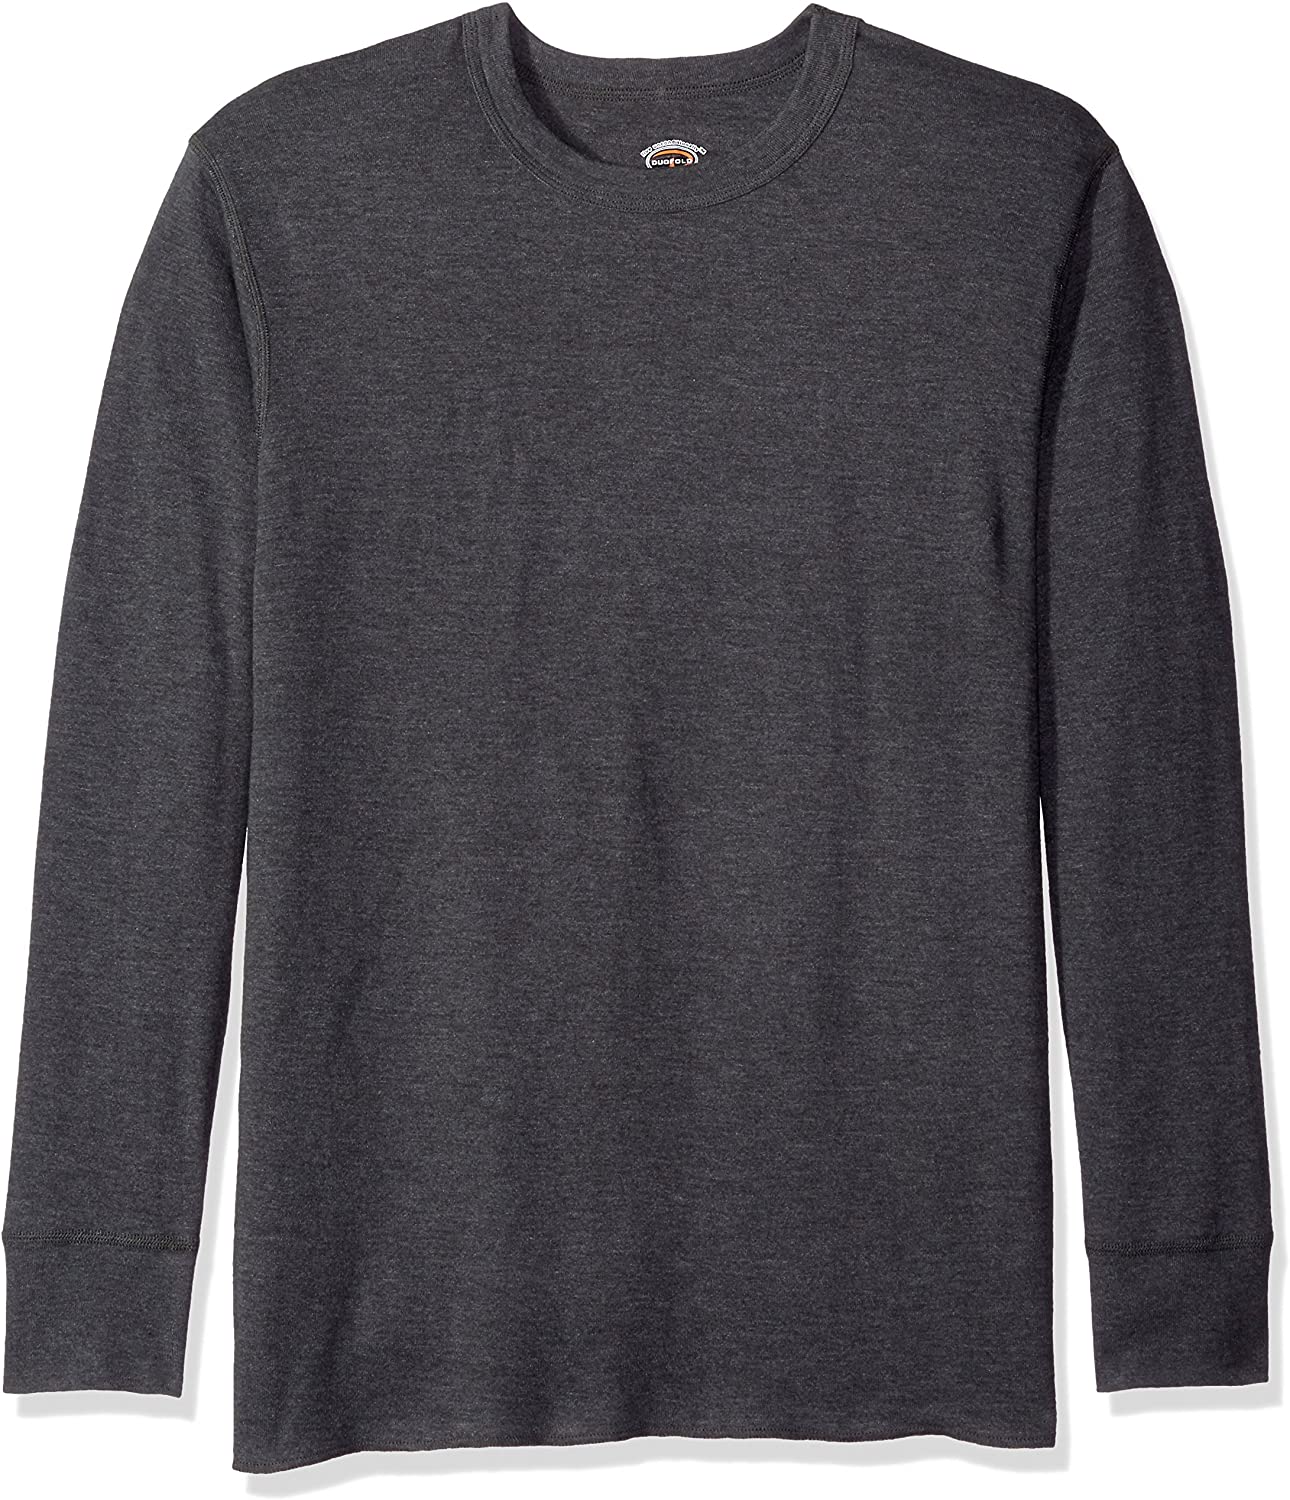 Duofold Men's Midweight L/S Crew with Moisture Wicking